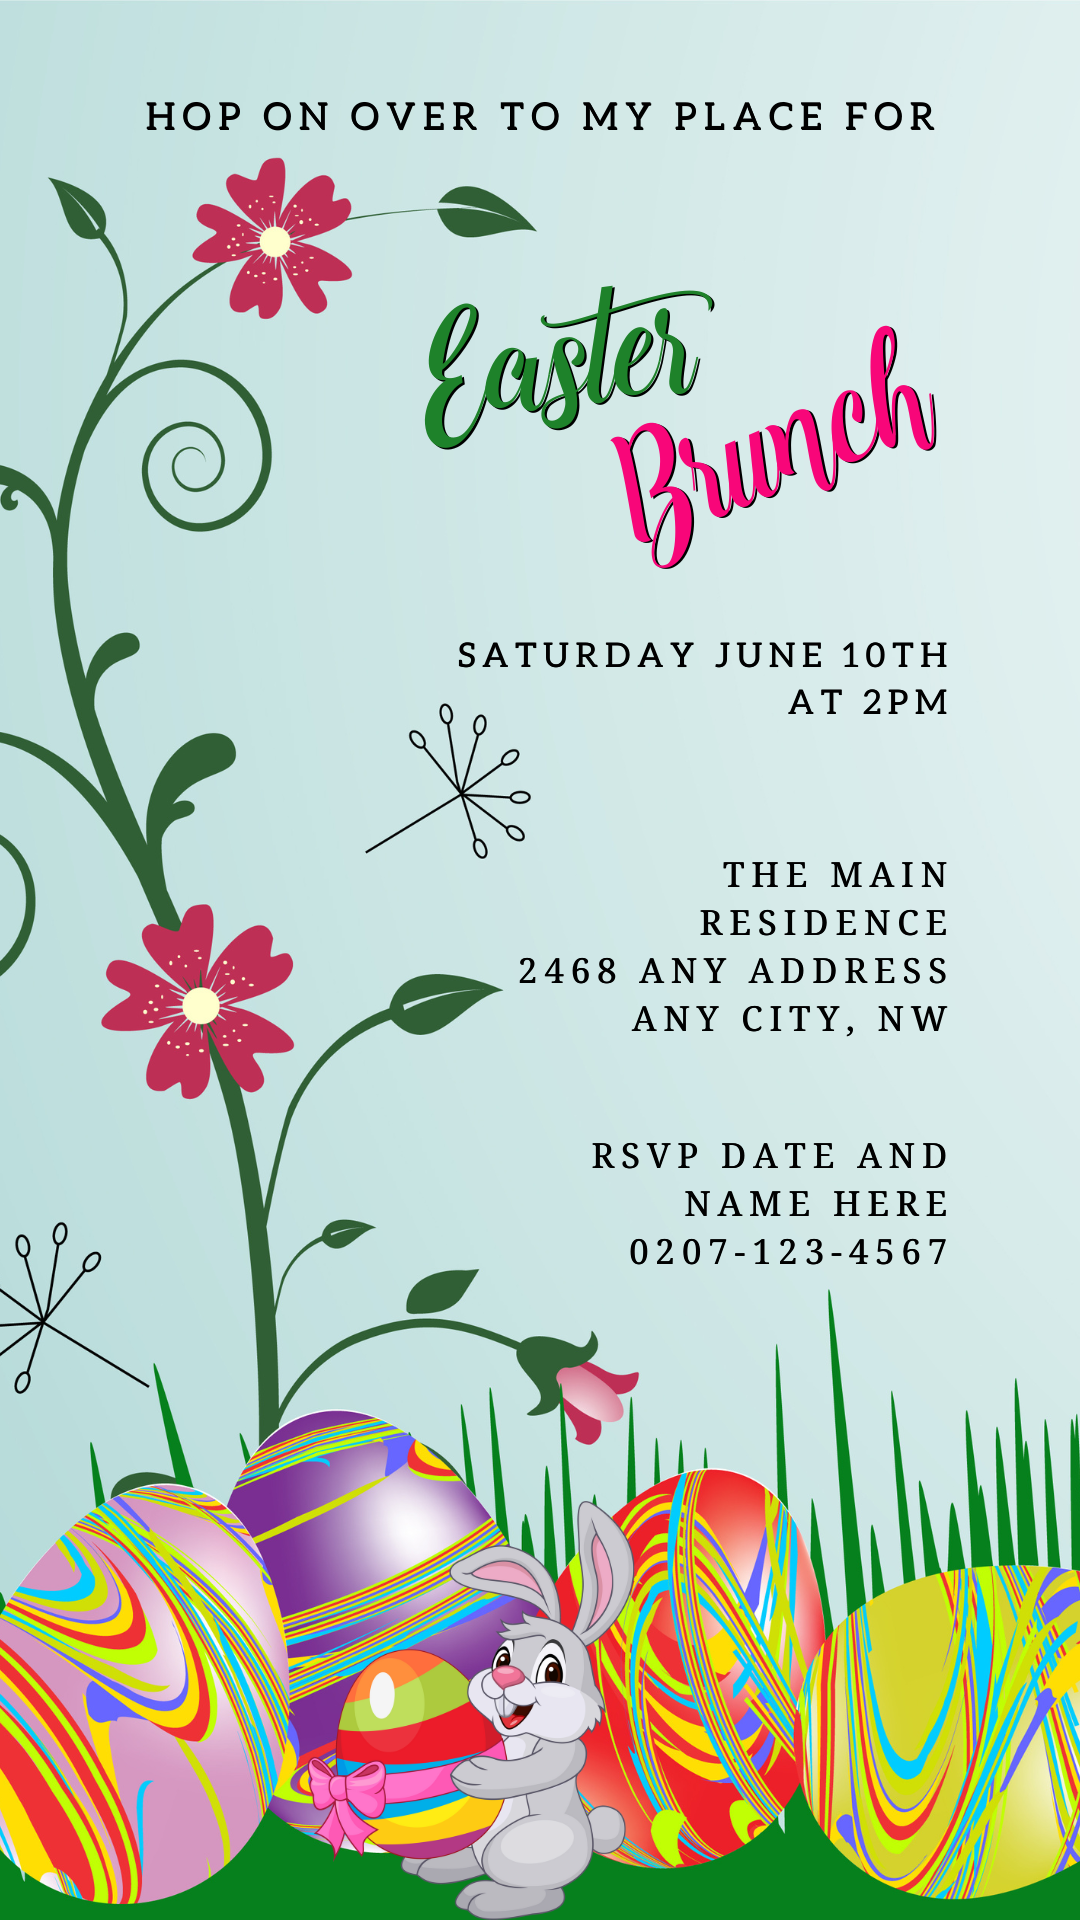 Cute Bunny & Colourful Easter Eggs | Easter Brunch Party Evite featuring a cartoon bunny holding an egg, floral designs, and editable text for a personalized, digital invitation.